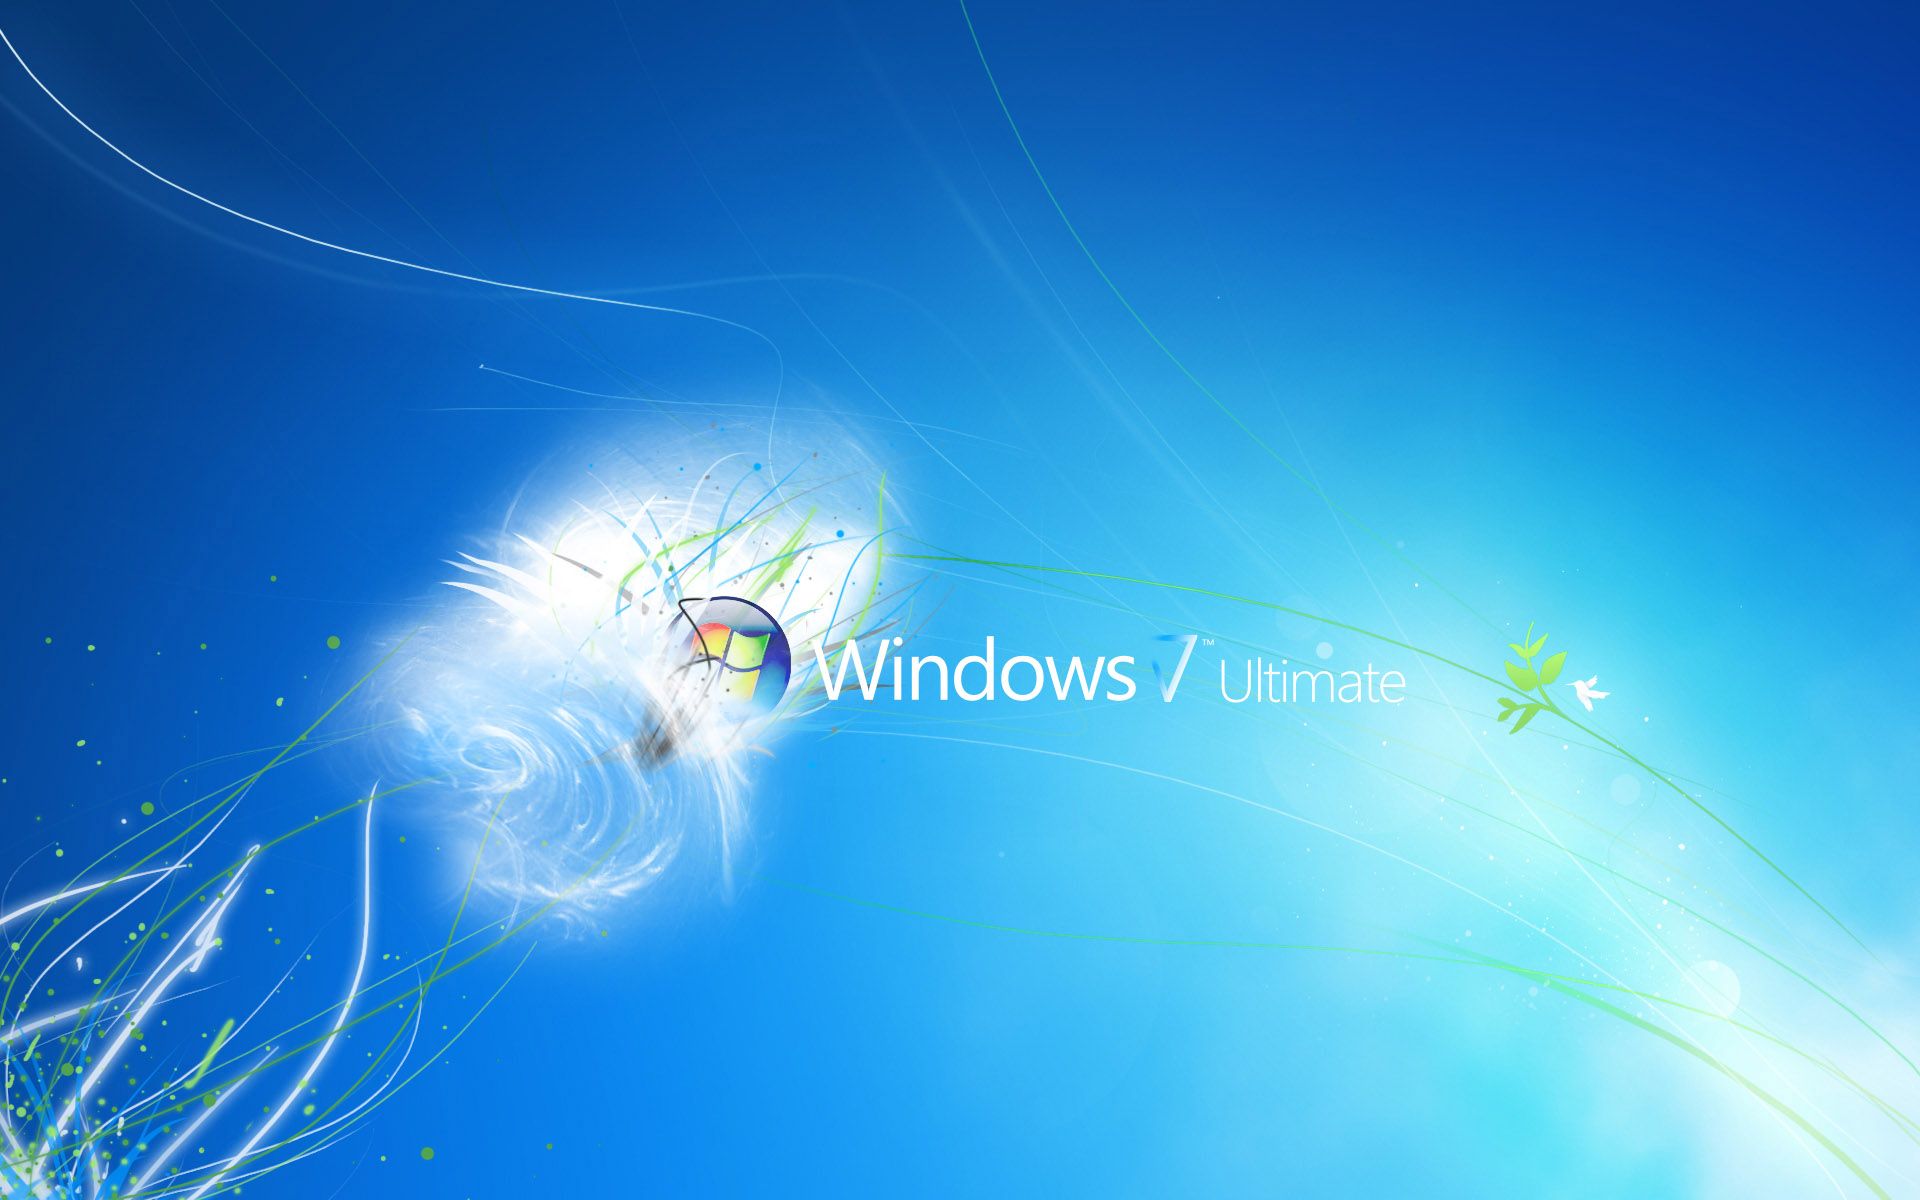 Glow Win 7 Starter OS | Get Latest Wallpapers